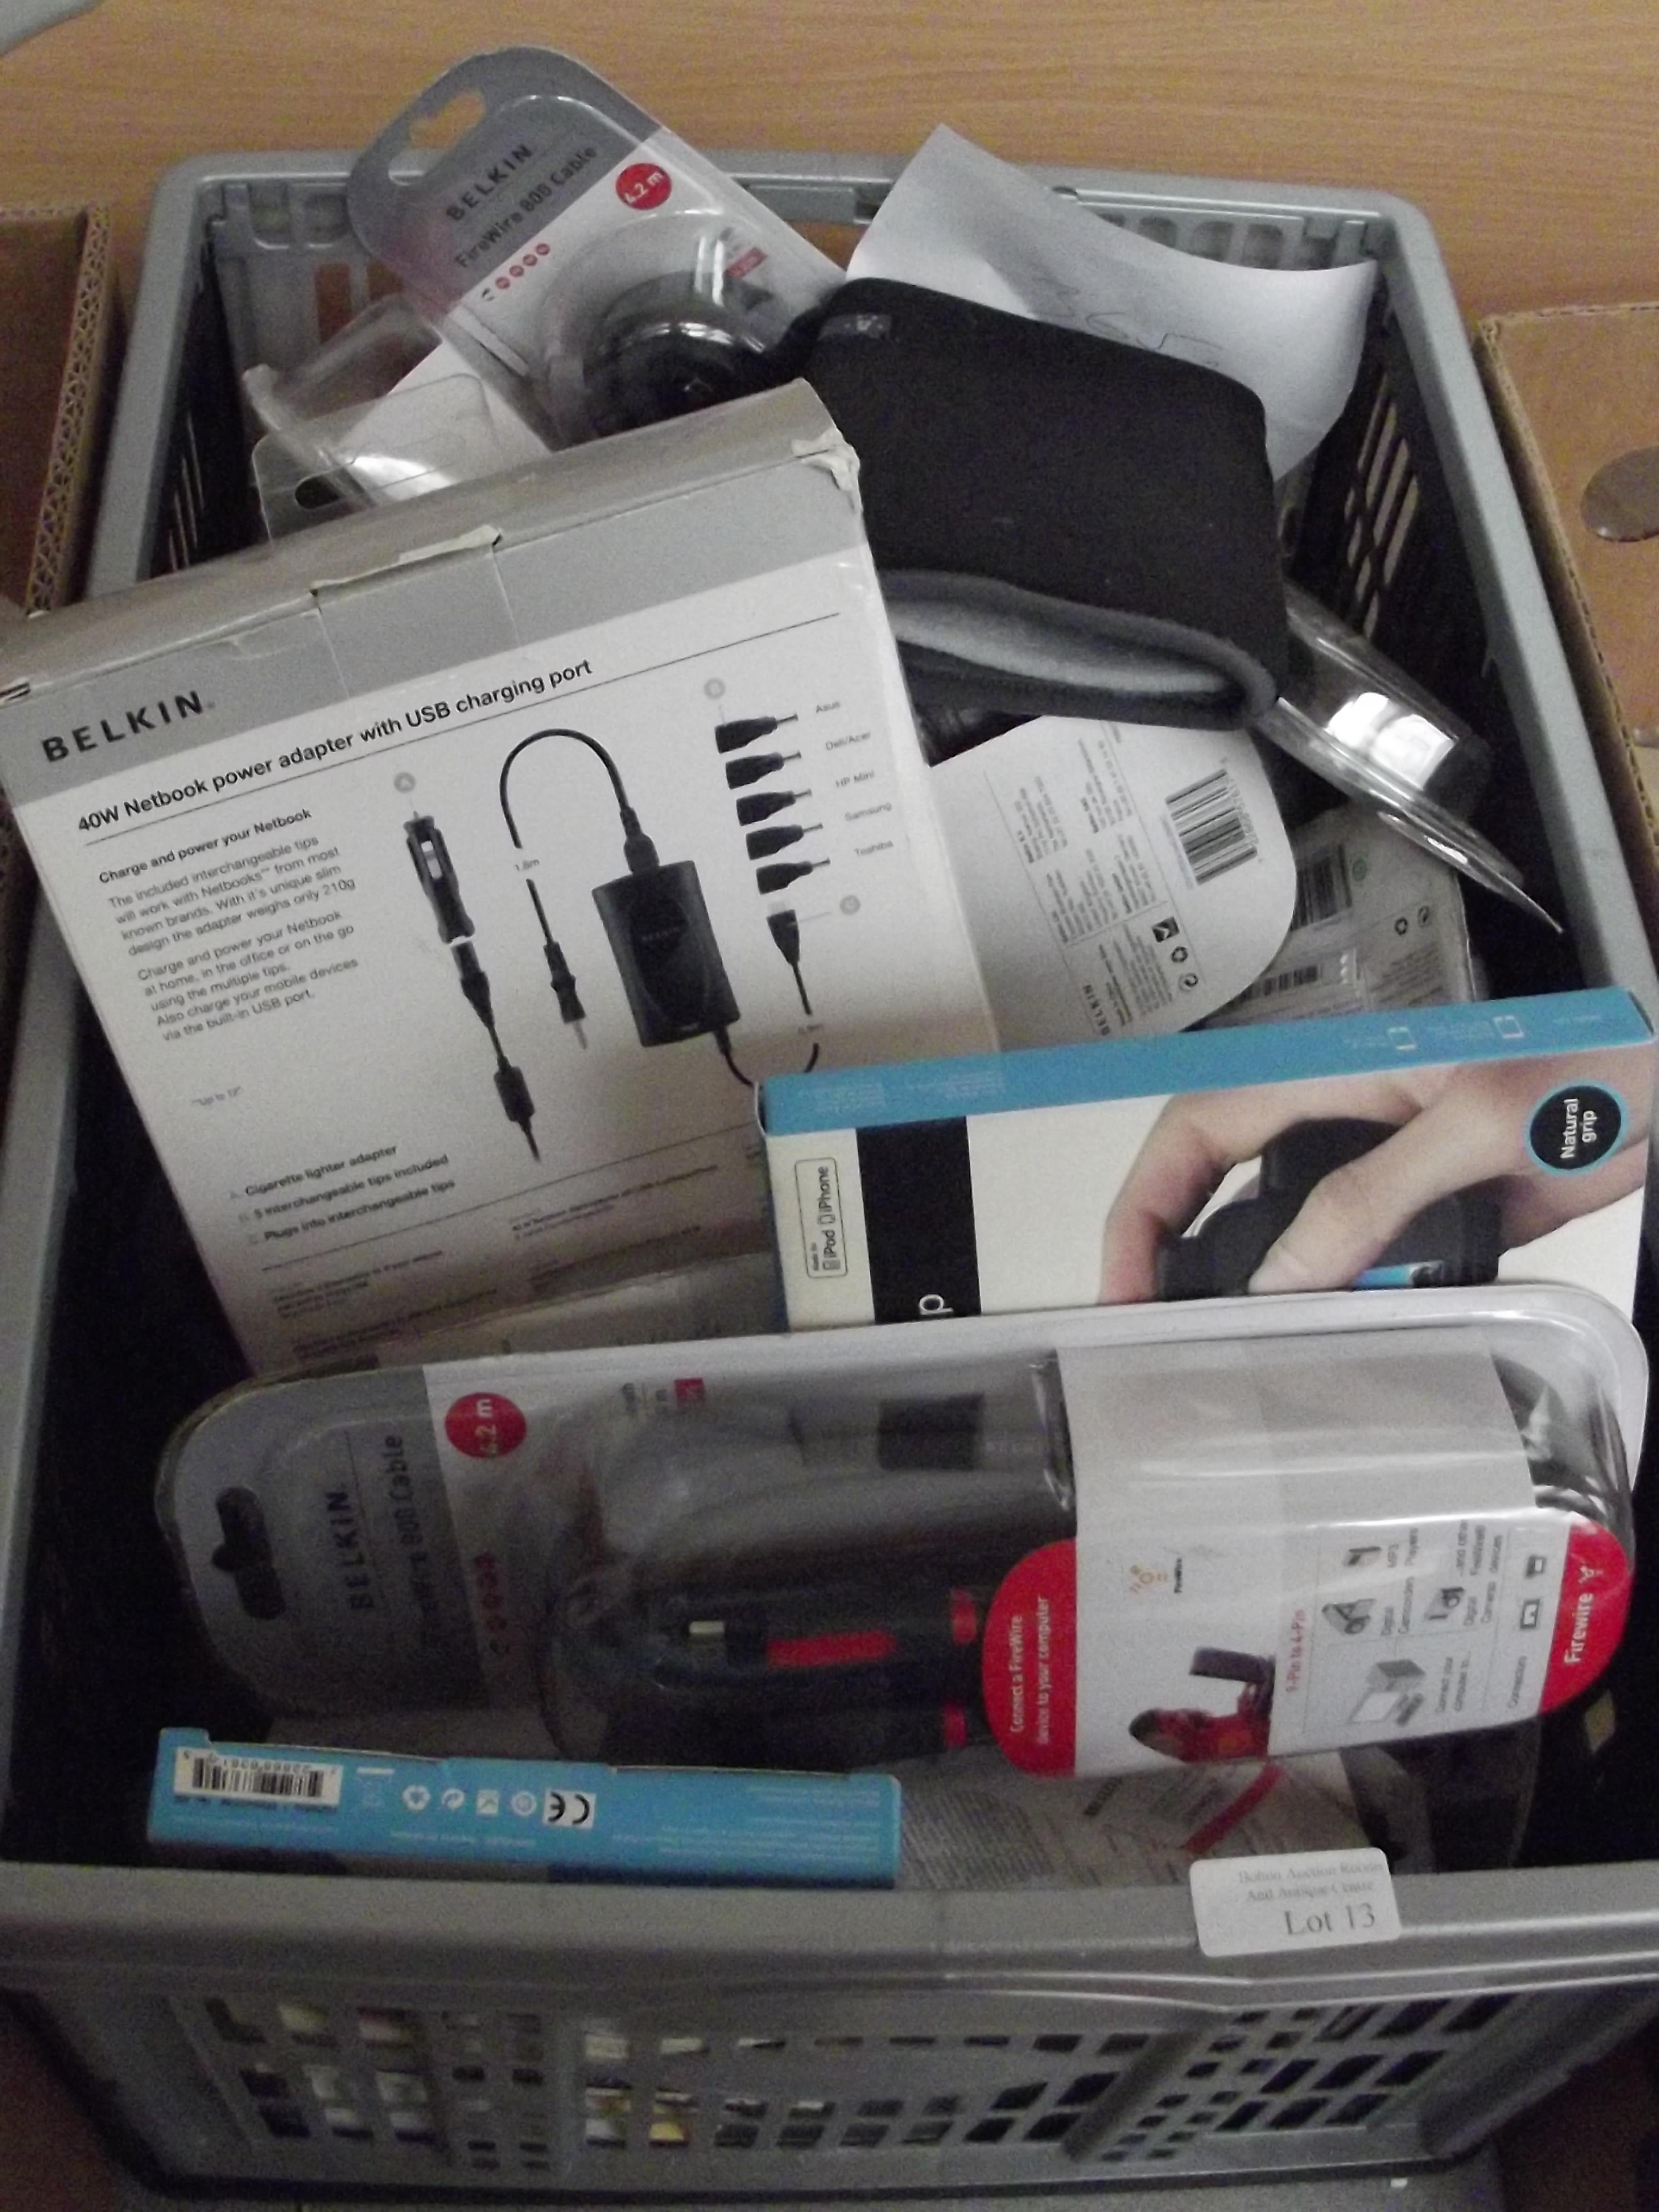 Box of computer accessories and others